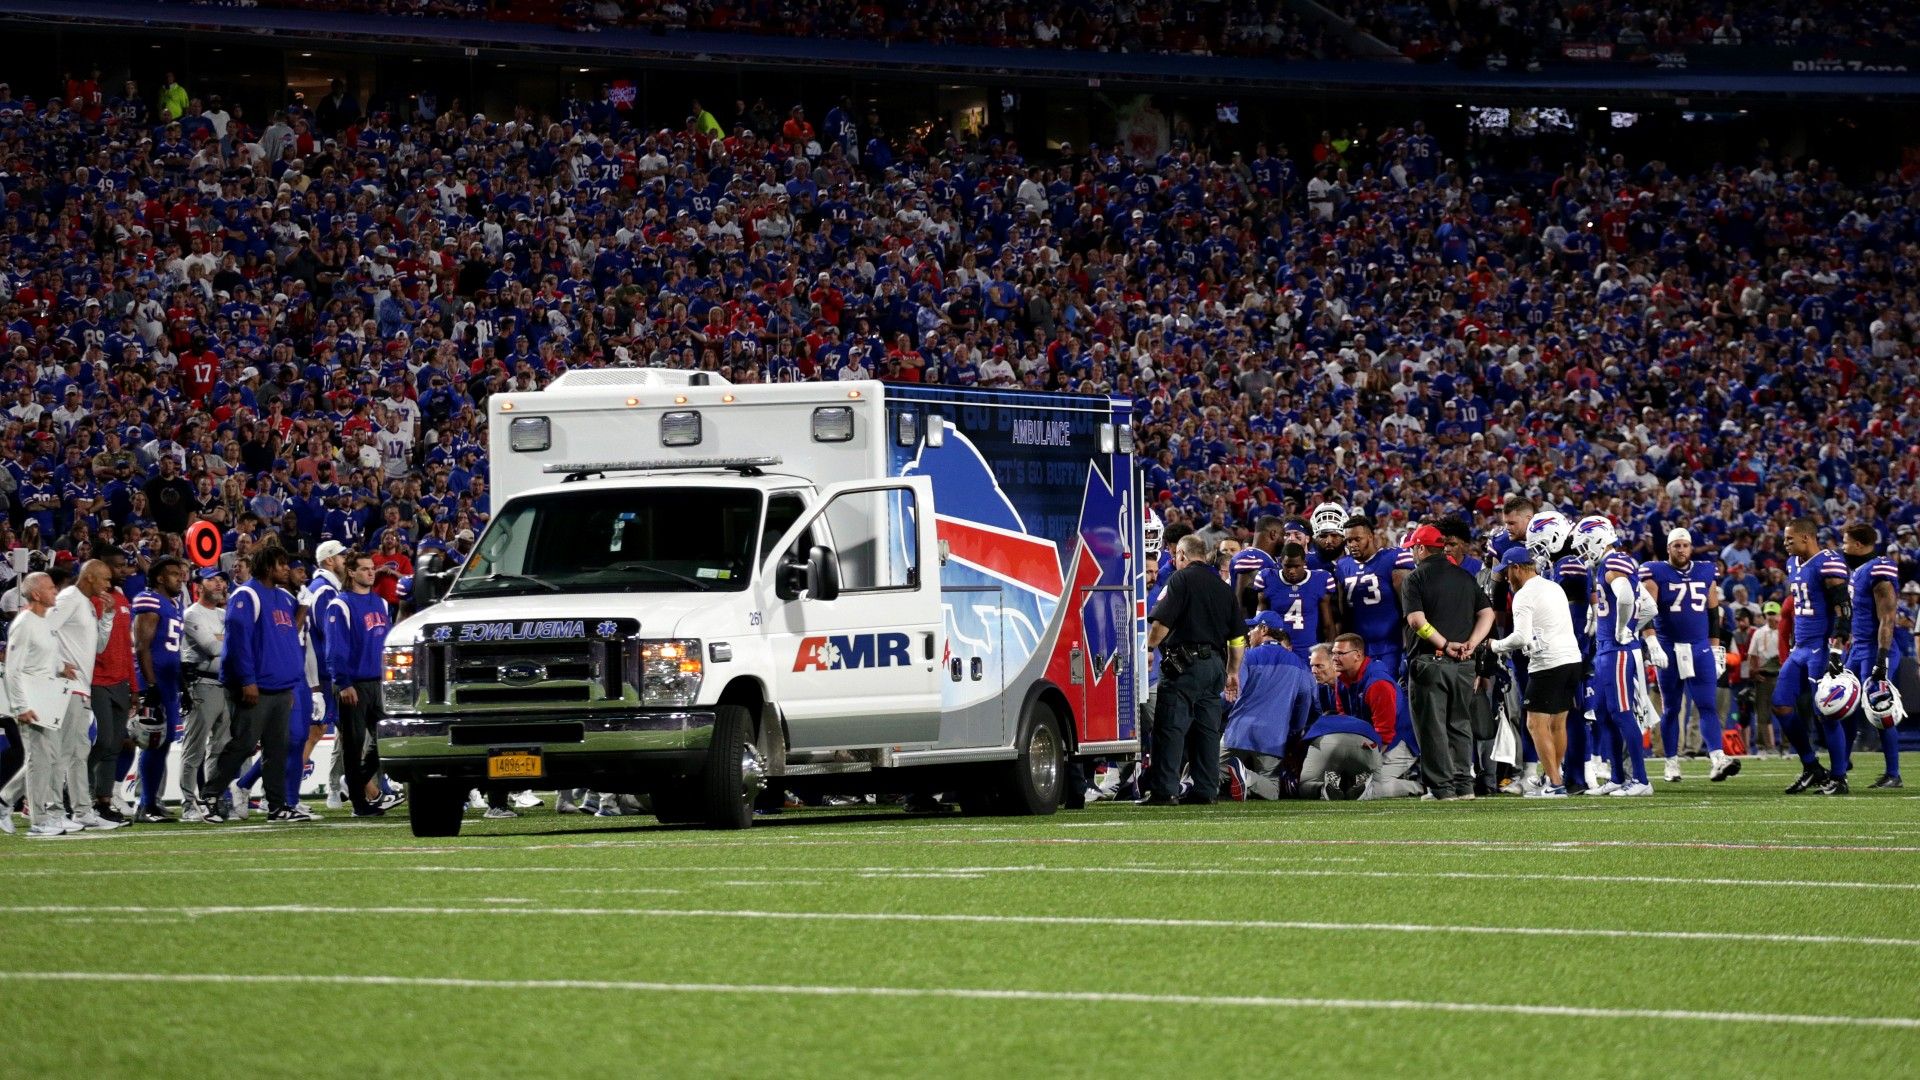 Sickening scene brings NFL game to a halt as Buffalo Bills player taken to hospital with neck injury